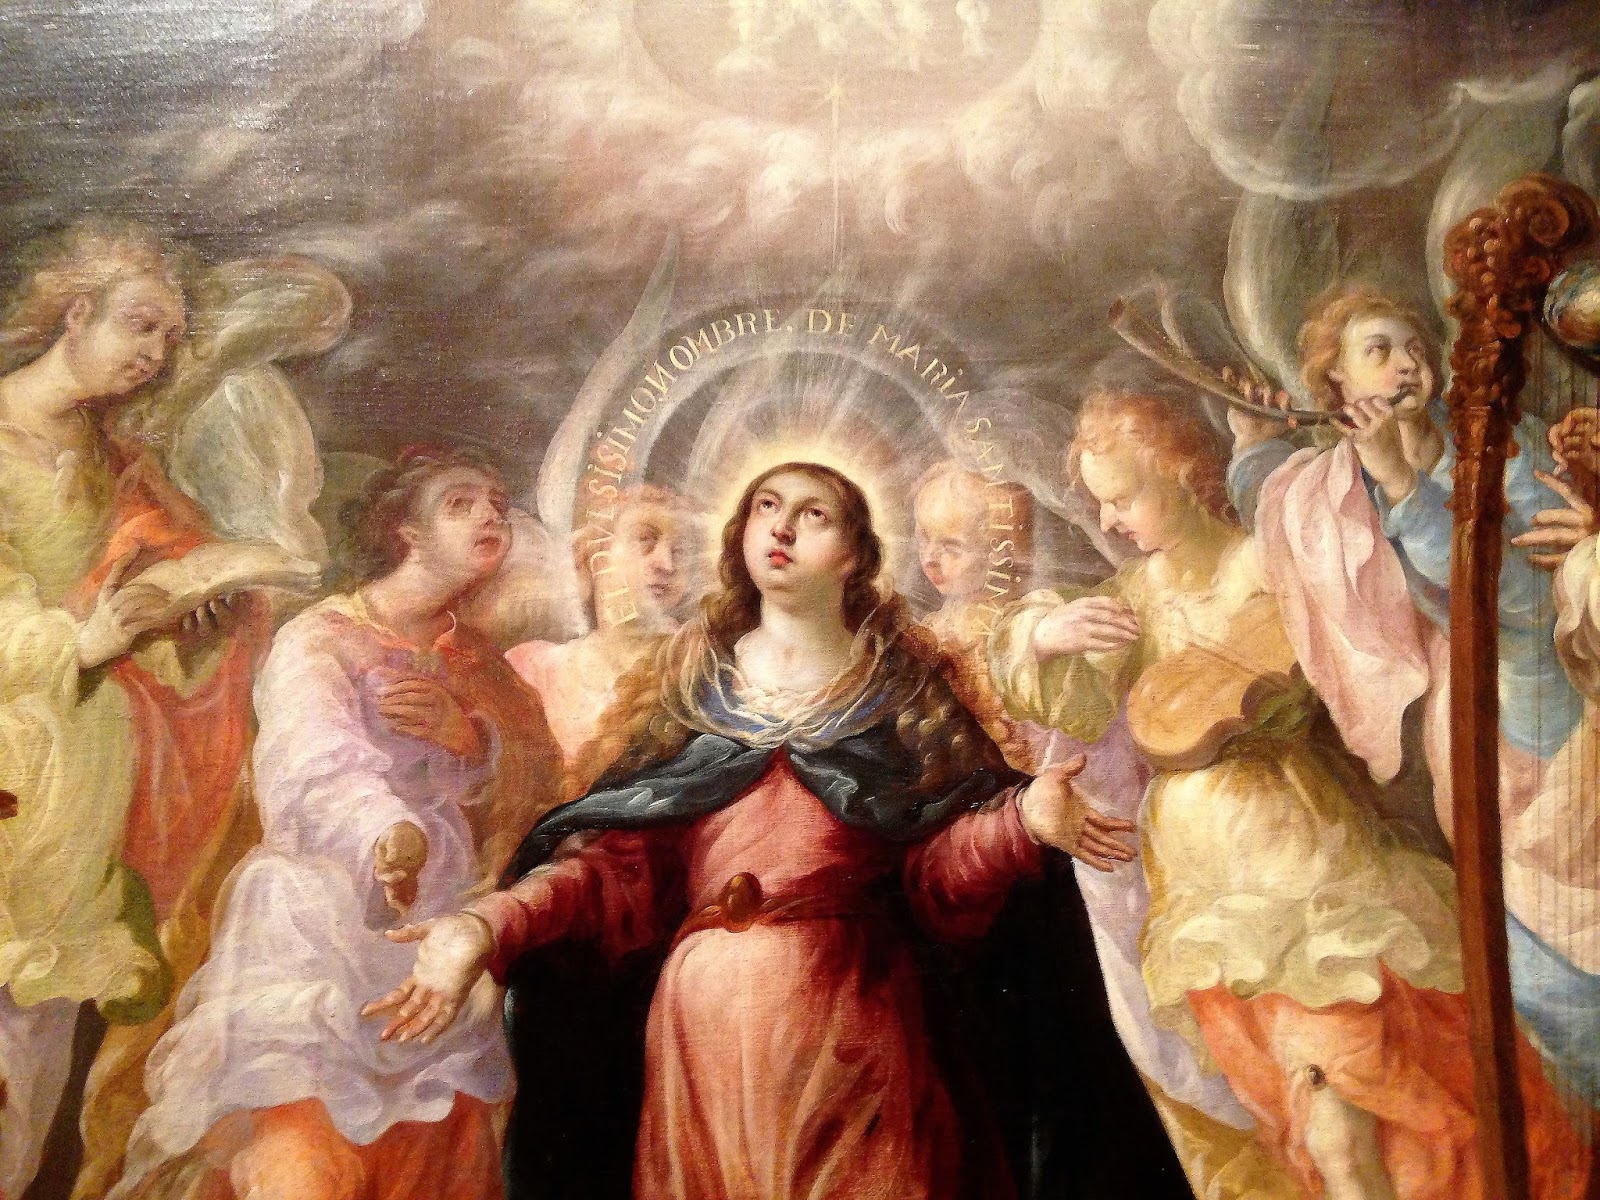 The Holy Name of Mary triumphs in battle